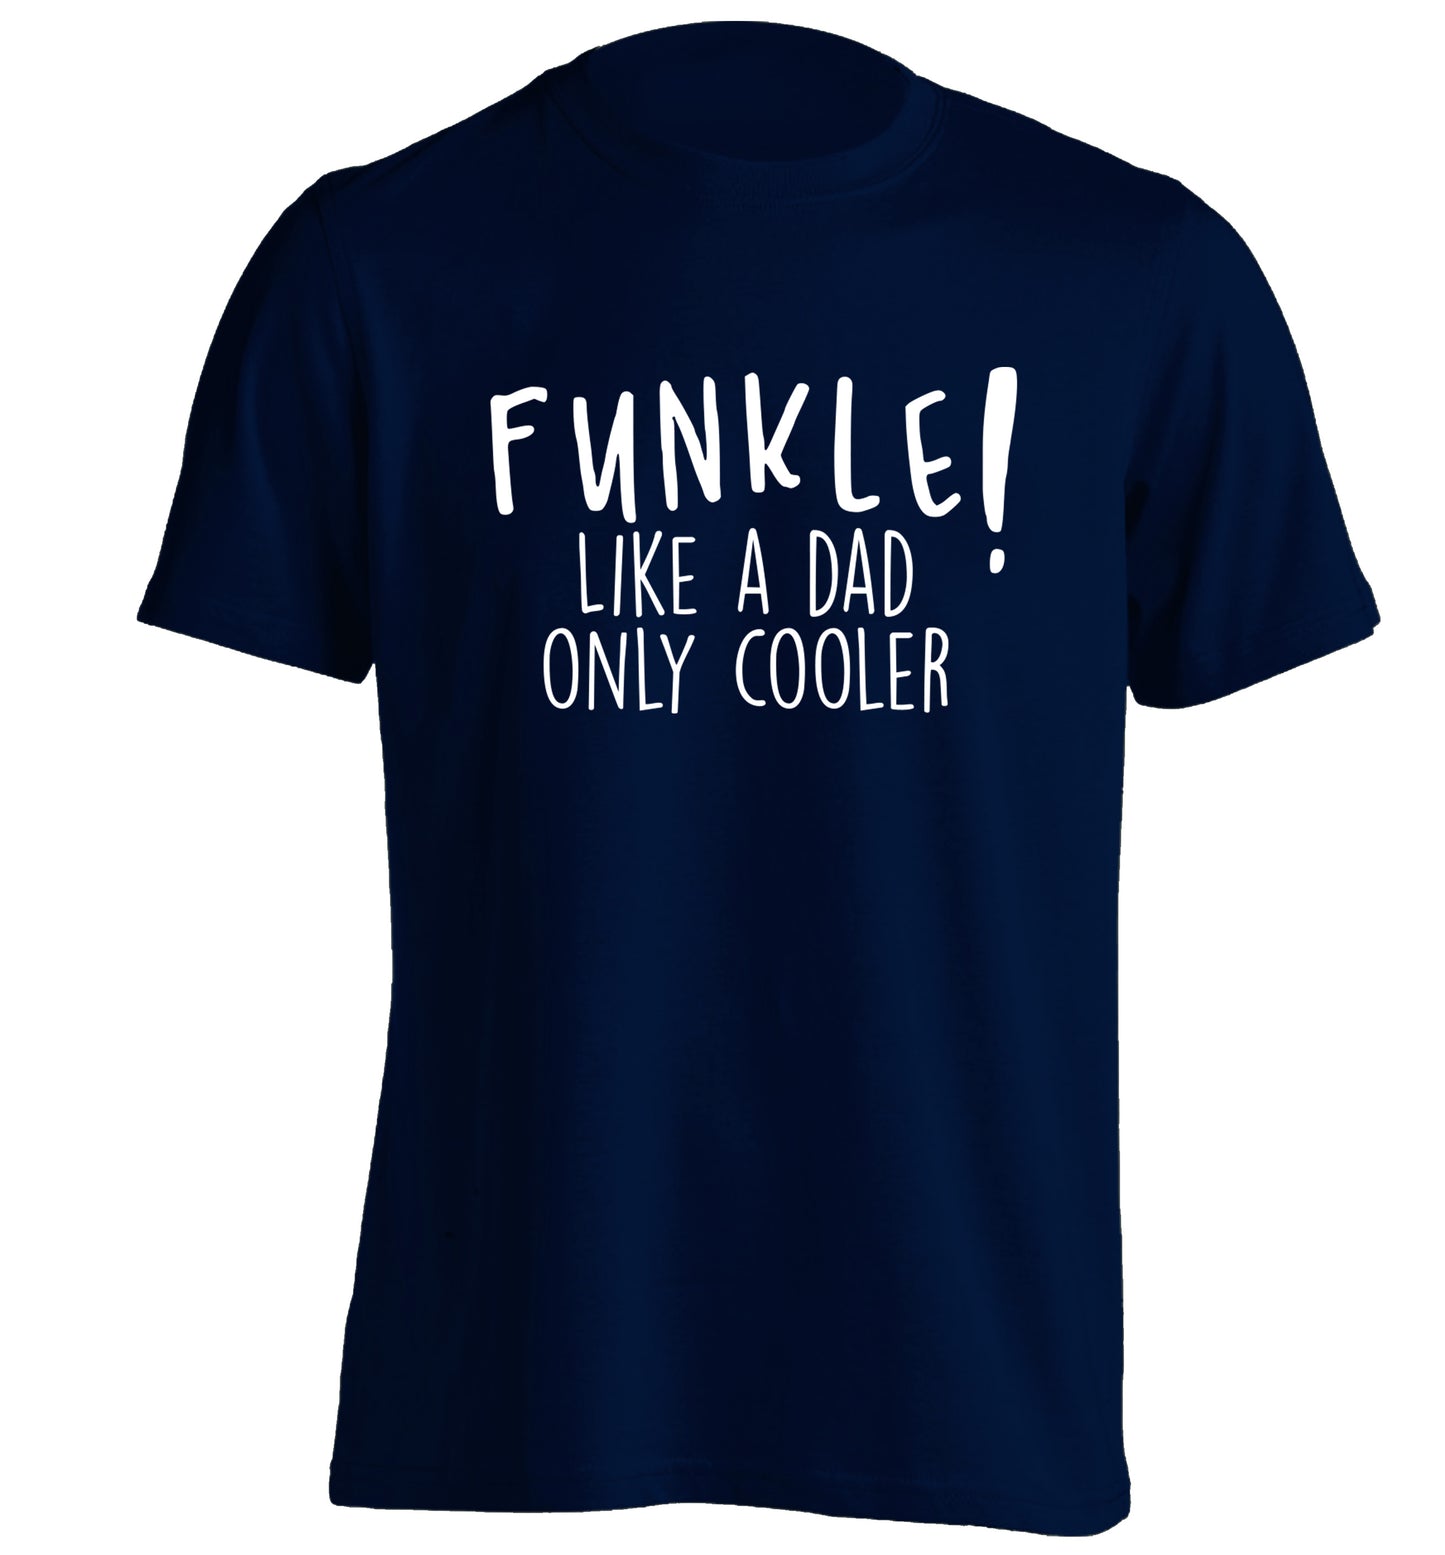 Funkle Like a Dad Only Cooler adults unisex navy Tshirt 2XL